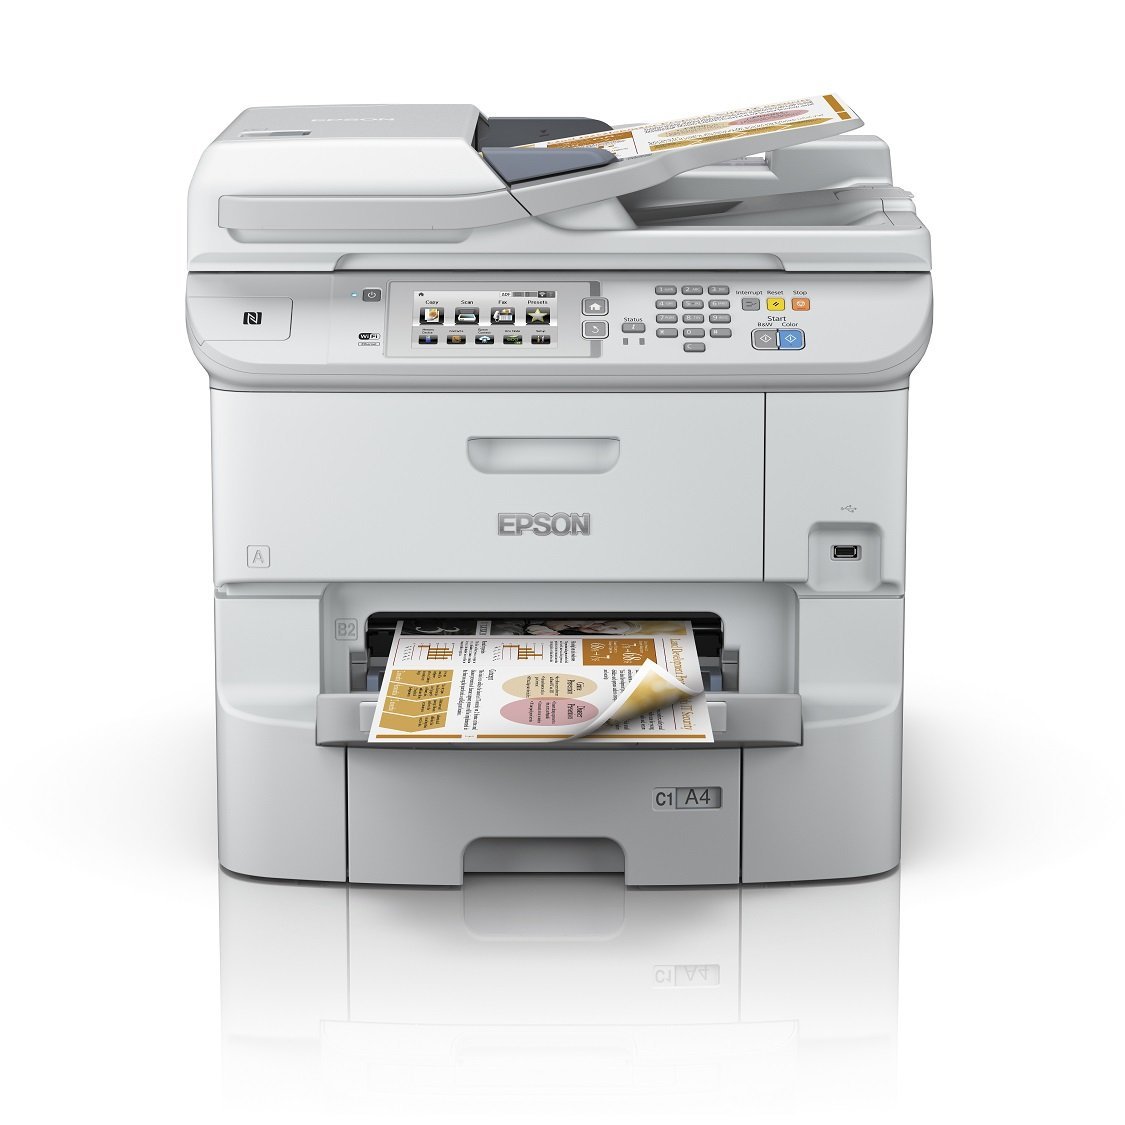 Epson WORKFORCE PRO WF-6590DWF A4 34PPMインク4IN1デュプレックス、C11CD49301（A4 34PPMインク4IN1デュプレックス）